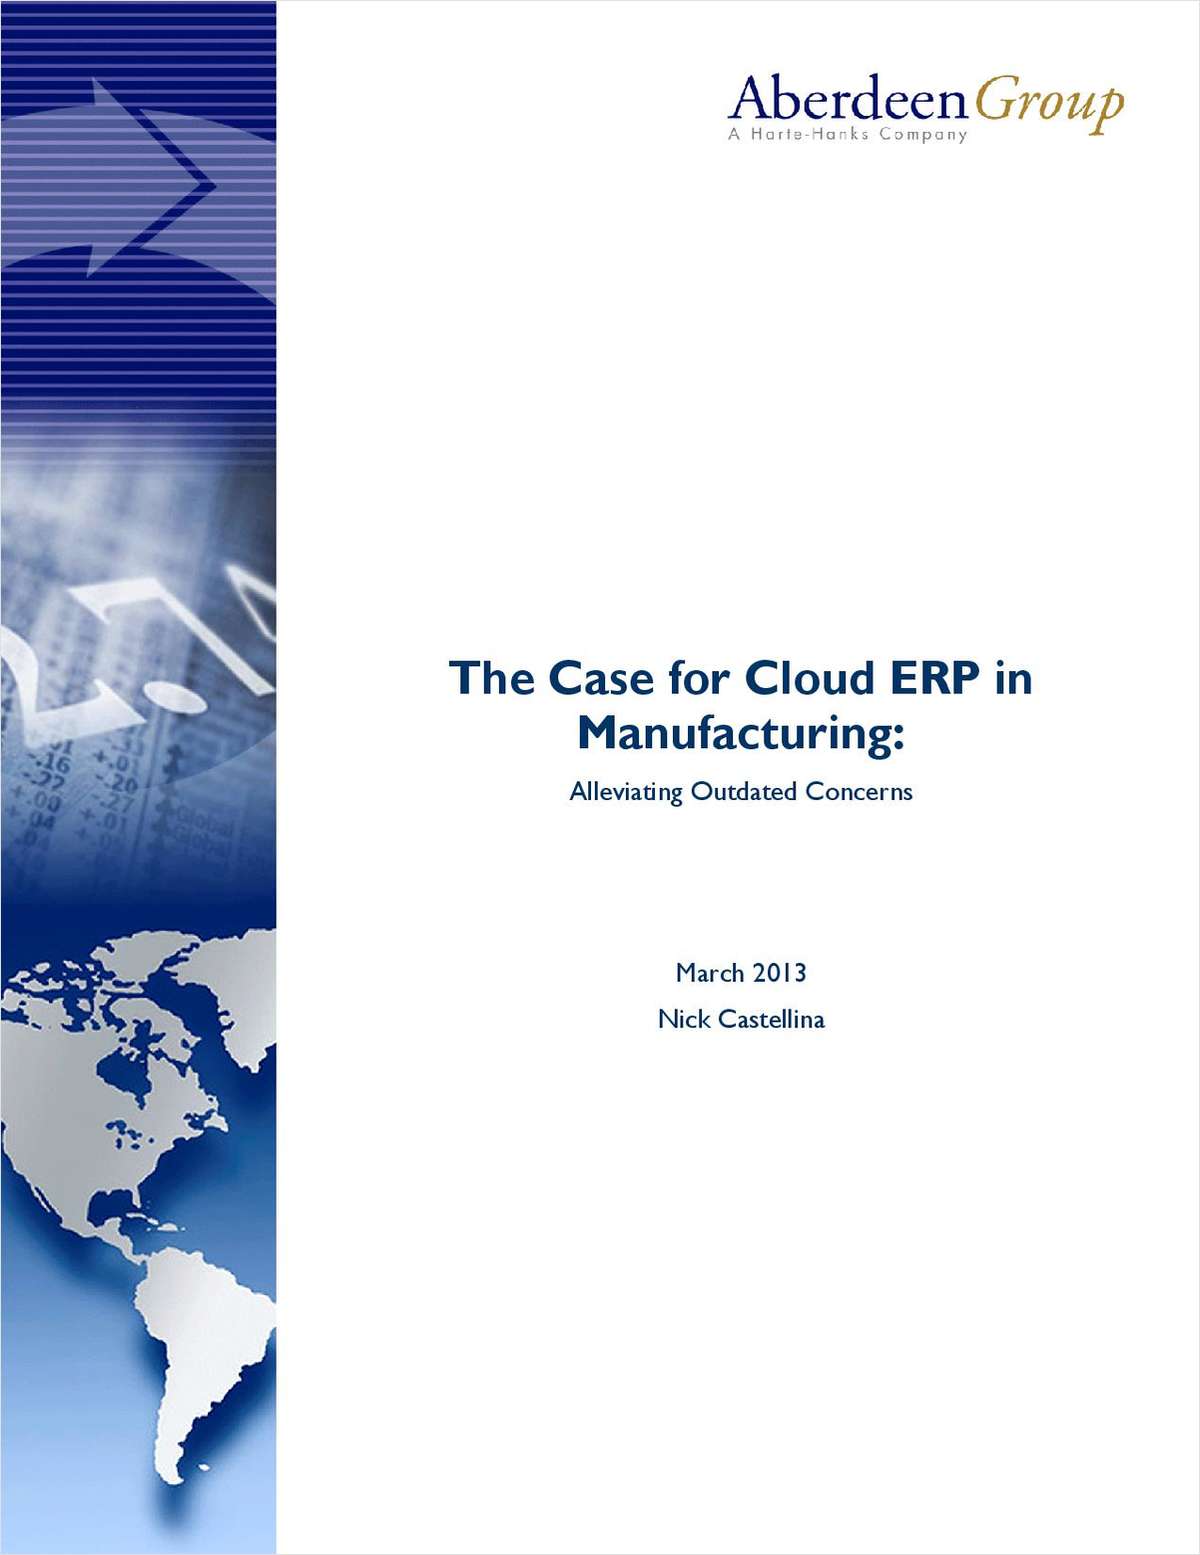 The Case for Cloud ERP in Manufacturing